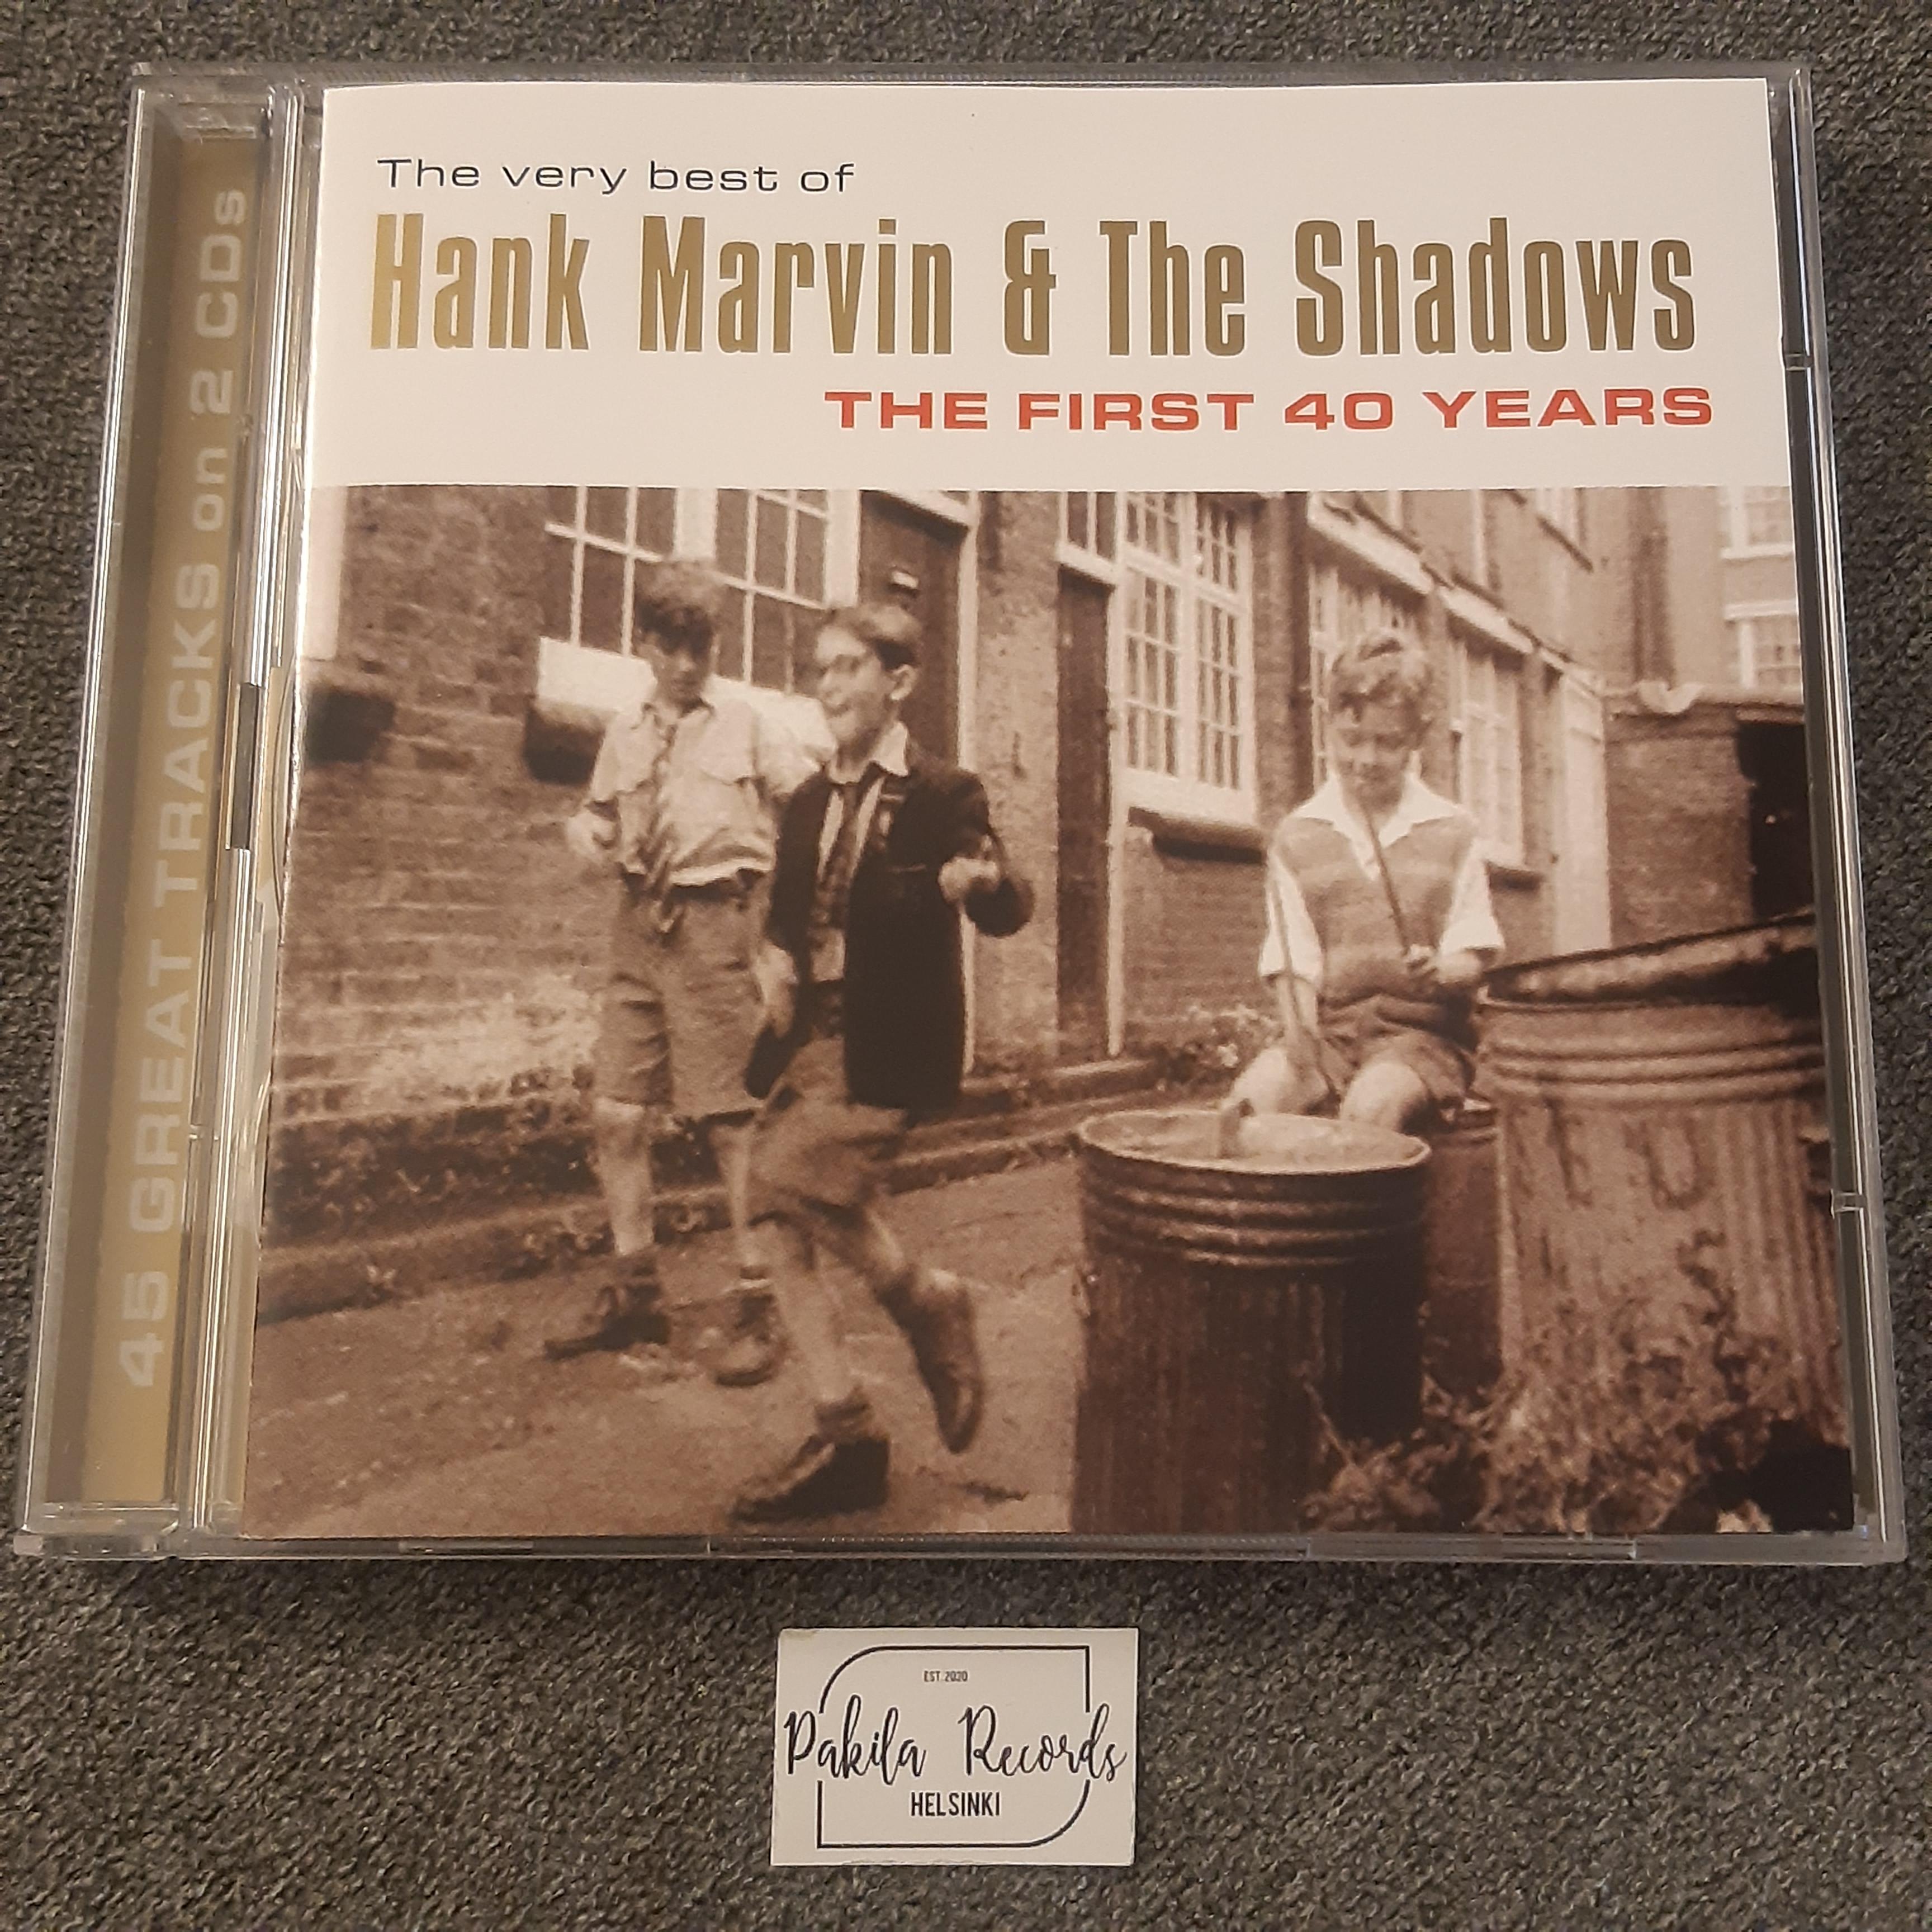 Hank Marvin & The Shadows - The Very Best Of,  The First 40 Years - 2 CD (käytetty)